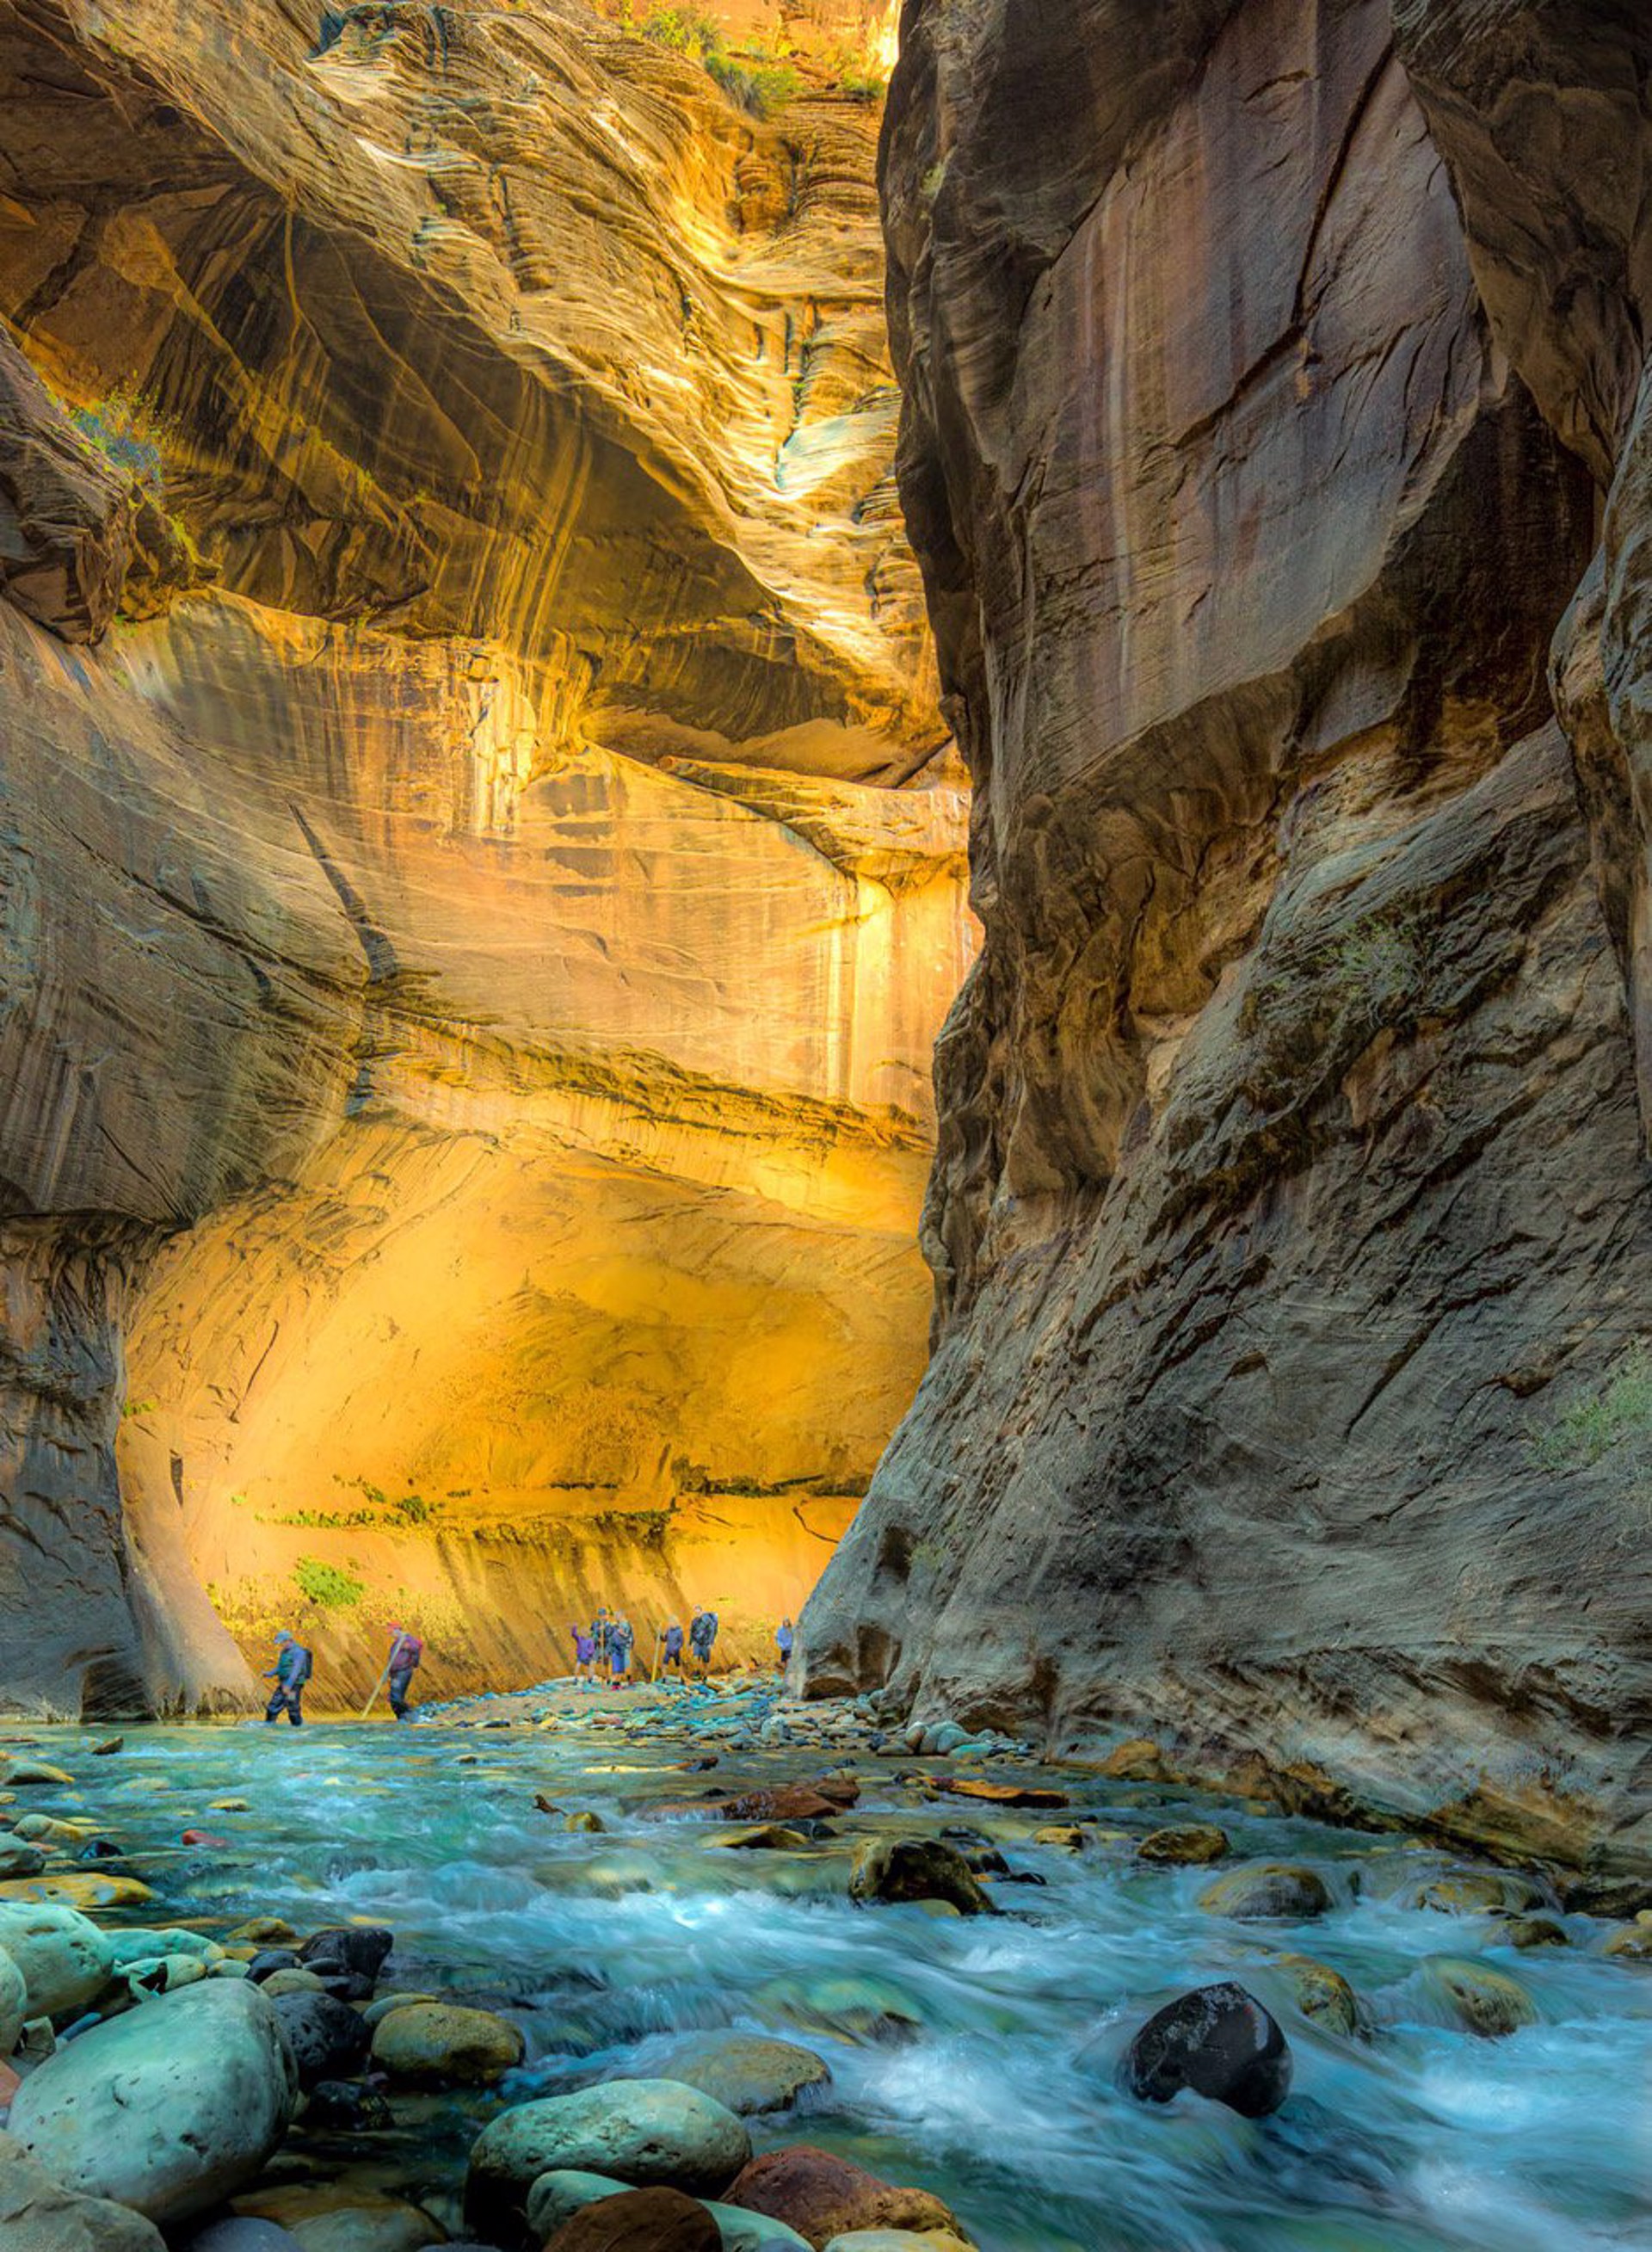 Fording the Stream, Zion by Tim Truby